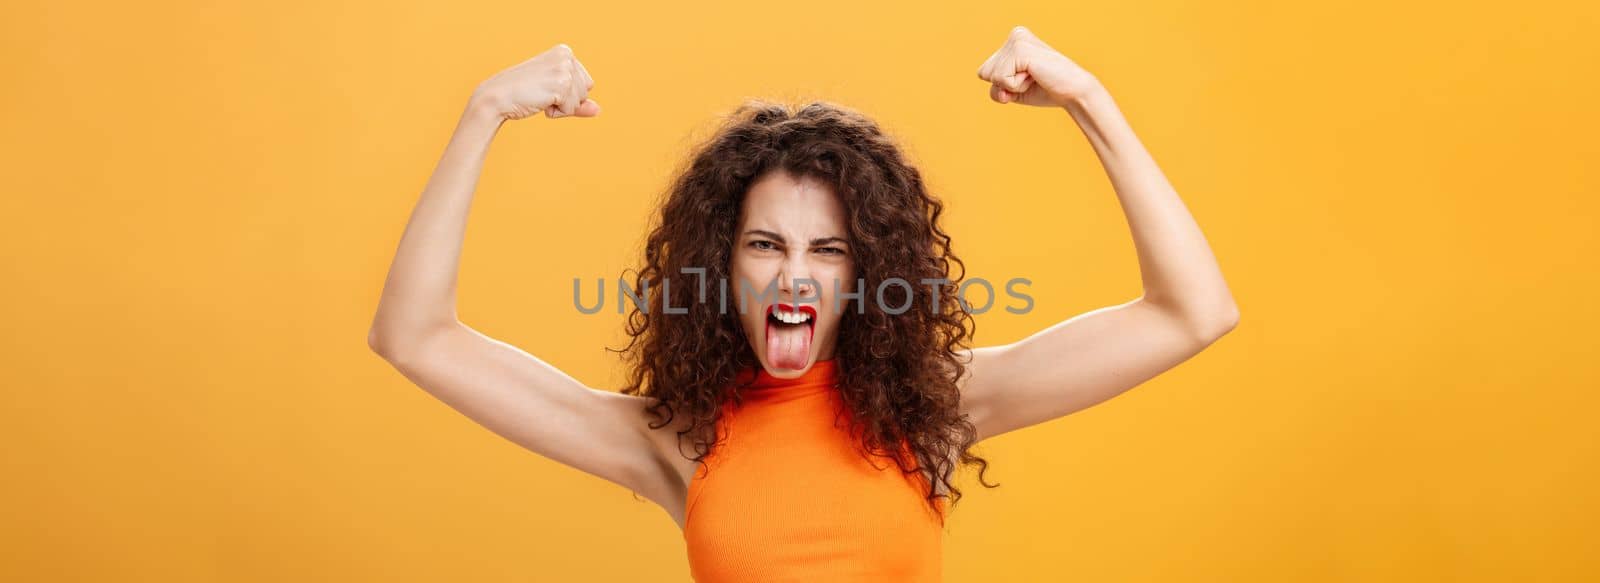 Waist-up shot of cool and daring caucasian female in orange top with tattoo on arm frowning making funny face sticking out tongue raising hands showing muscles feeling power and strengths by Benzoix